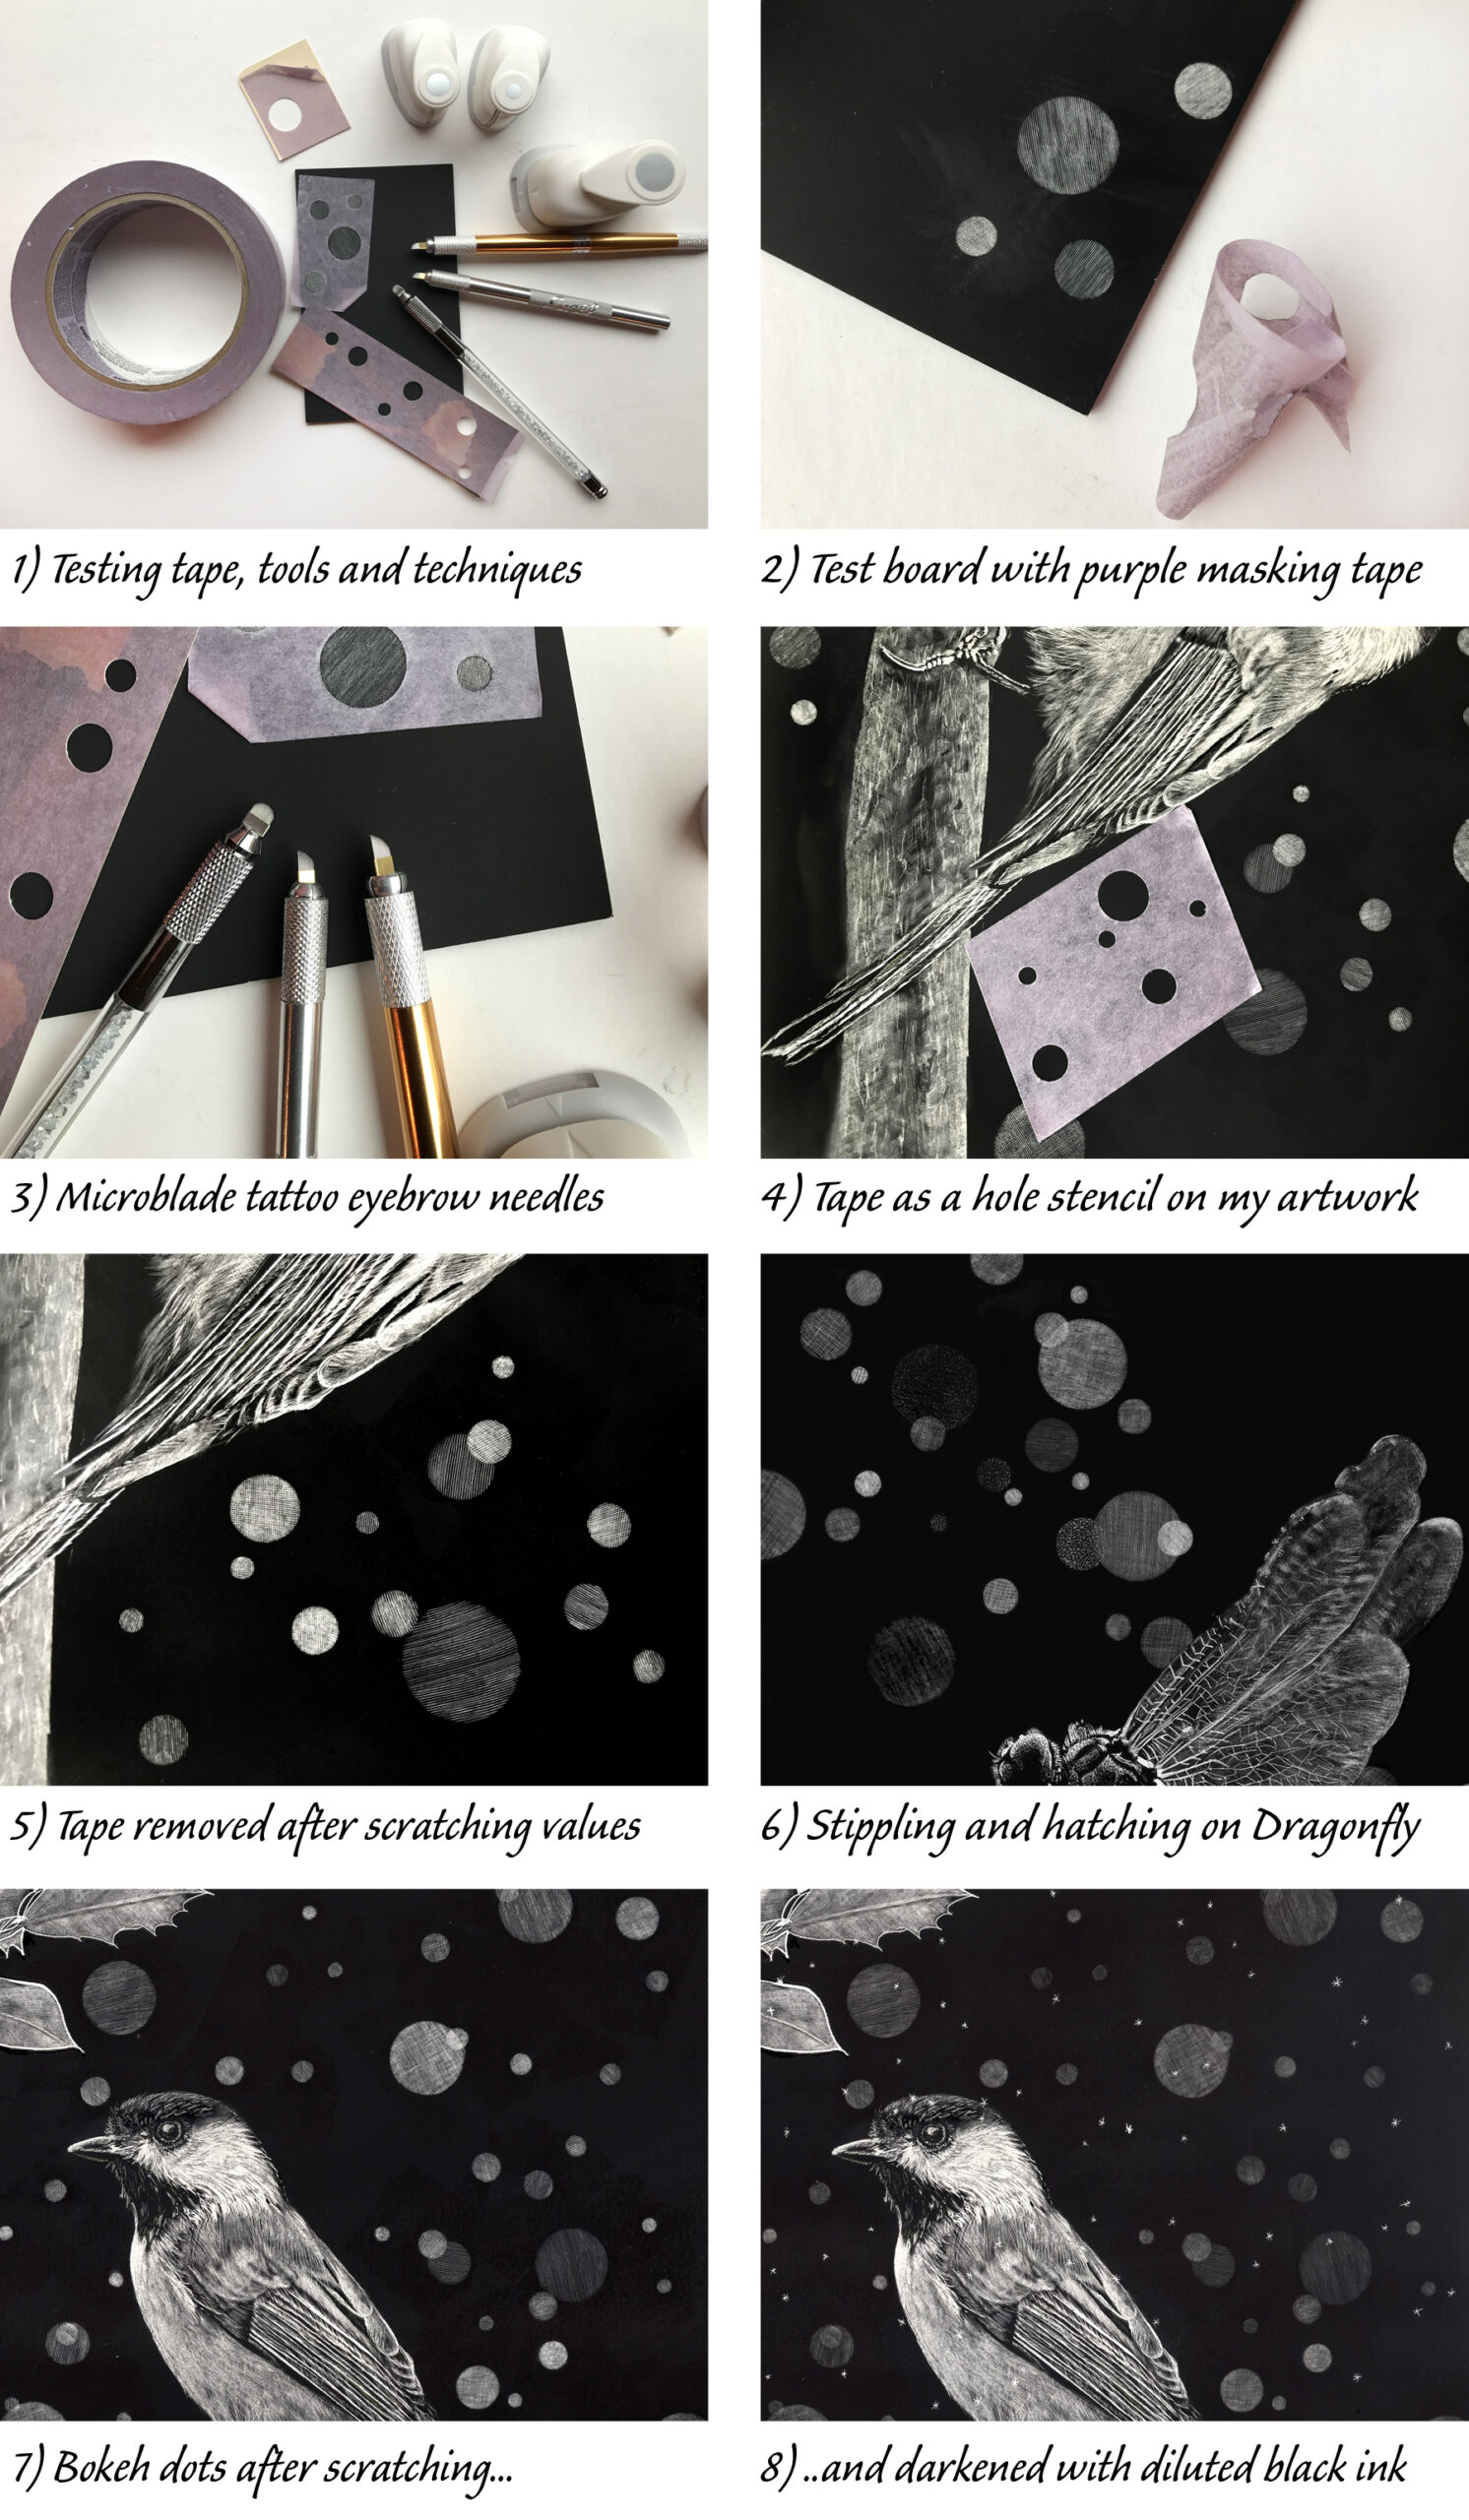 Process of creating the bokeh effect on a scratchboard